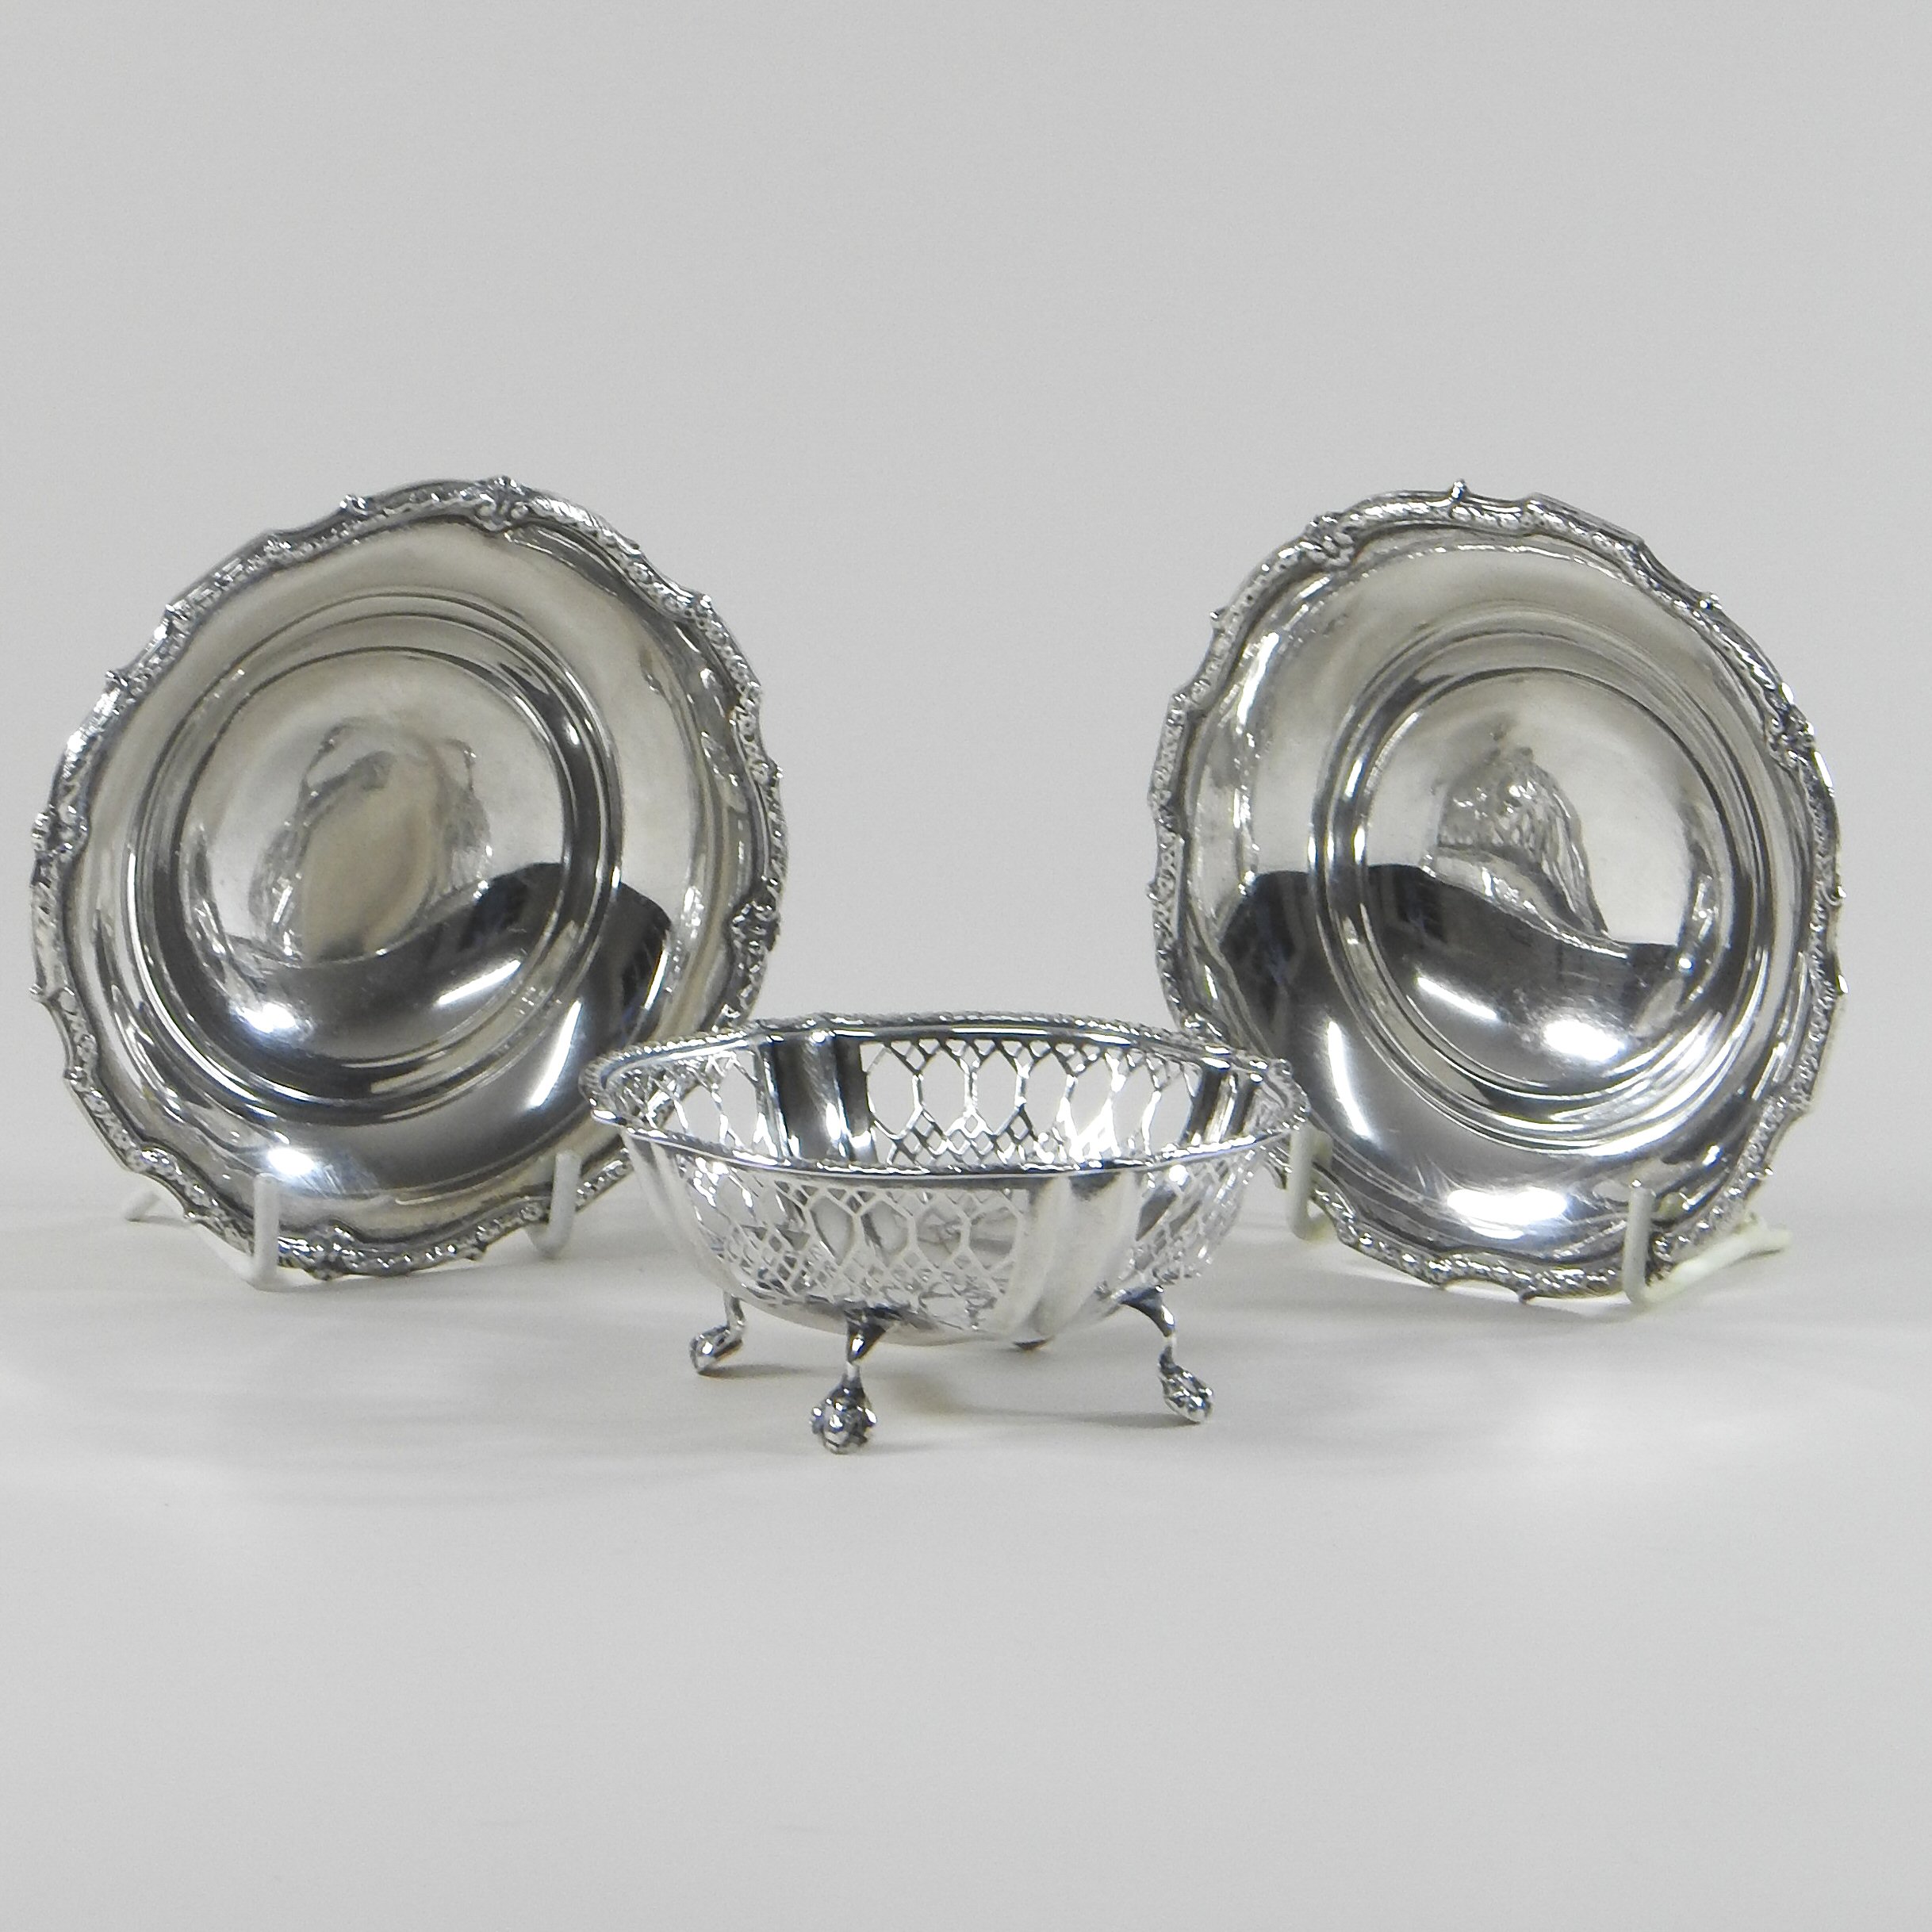 A pair of early 20th century silver bon-bon dishes, with scrolled borders, Birmingham 1938,